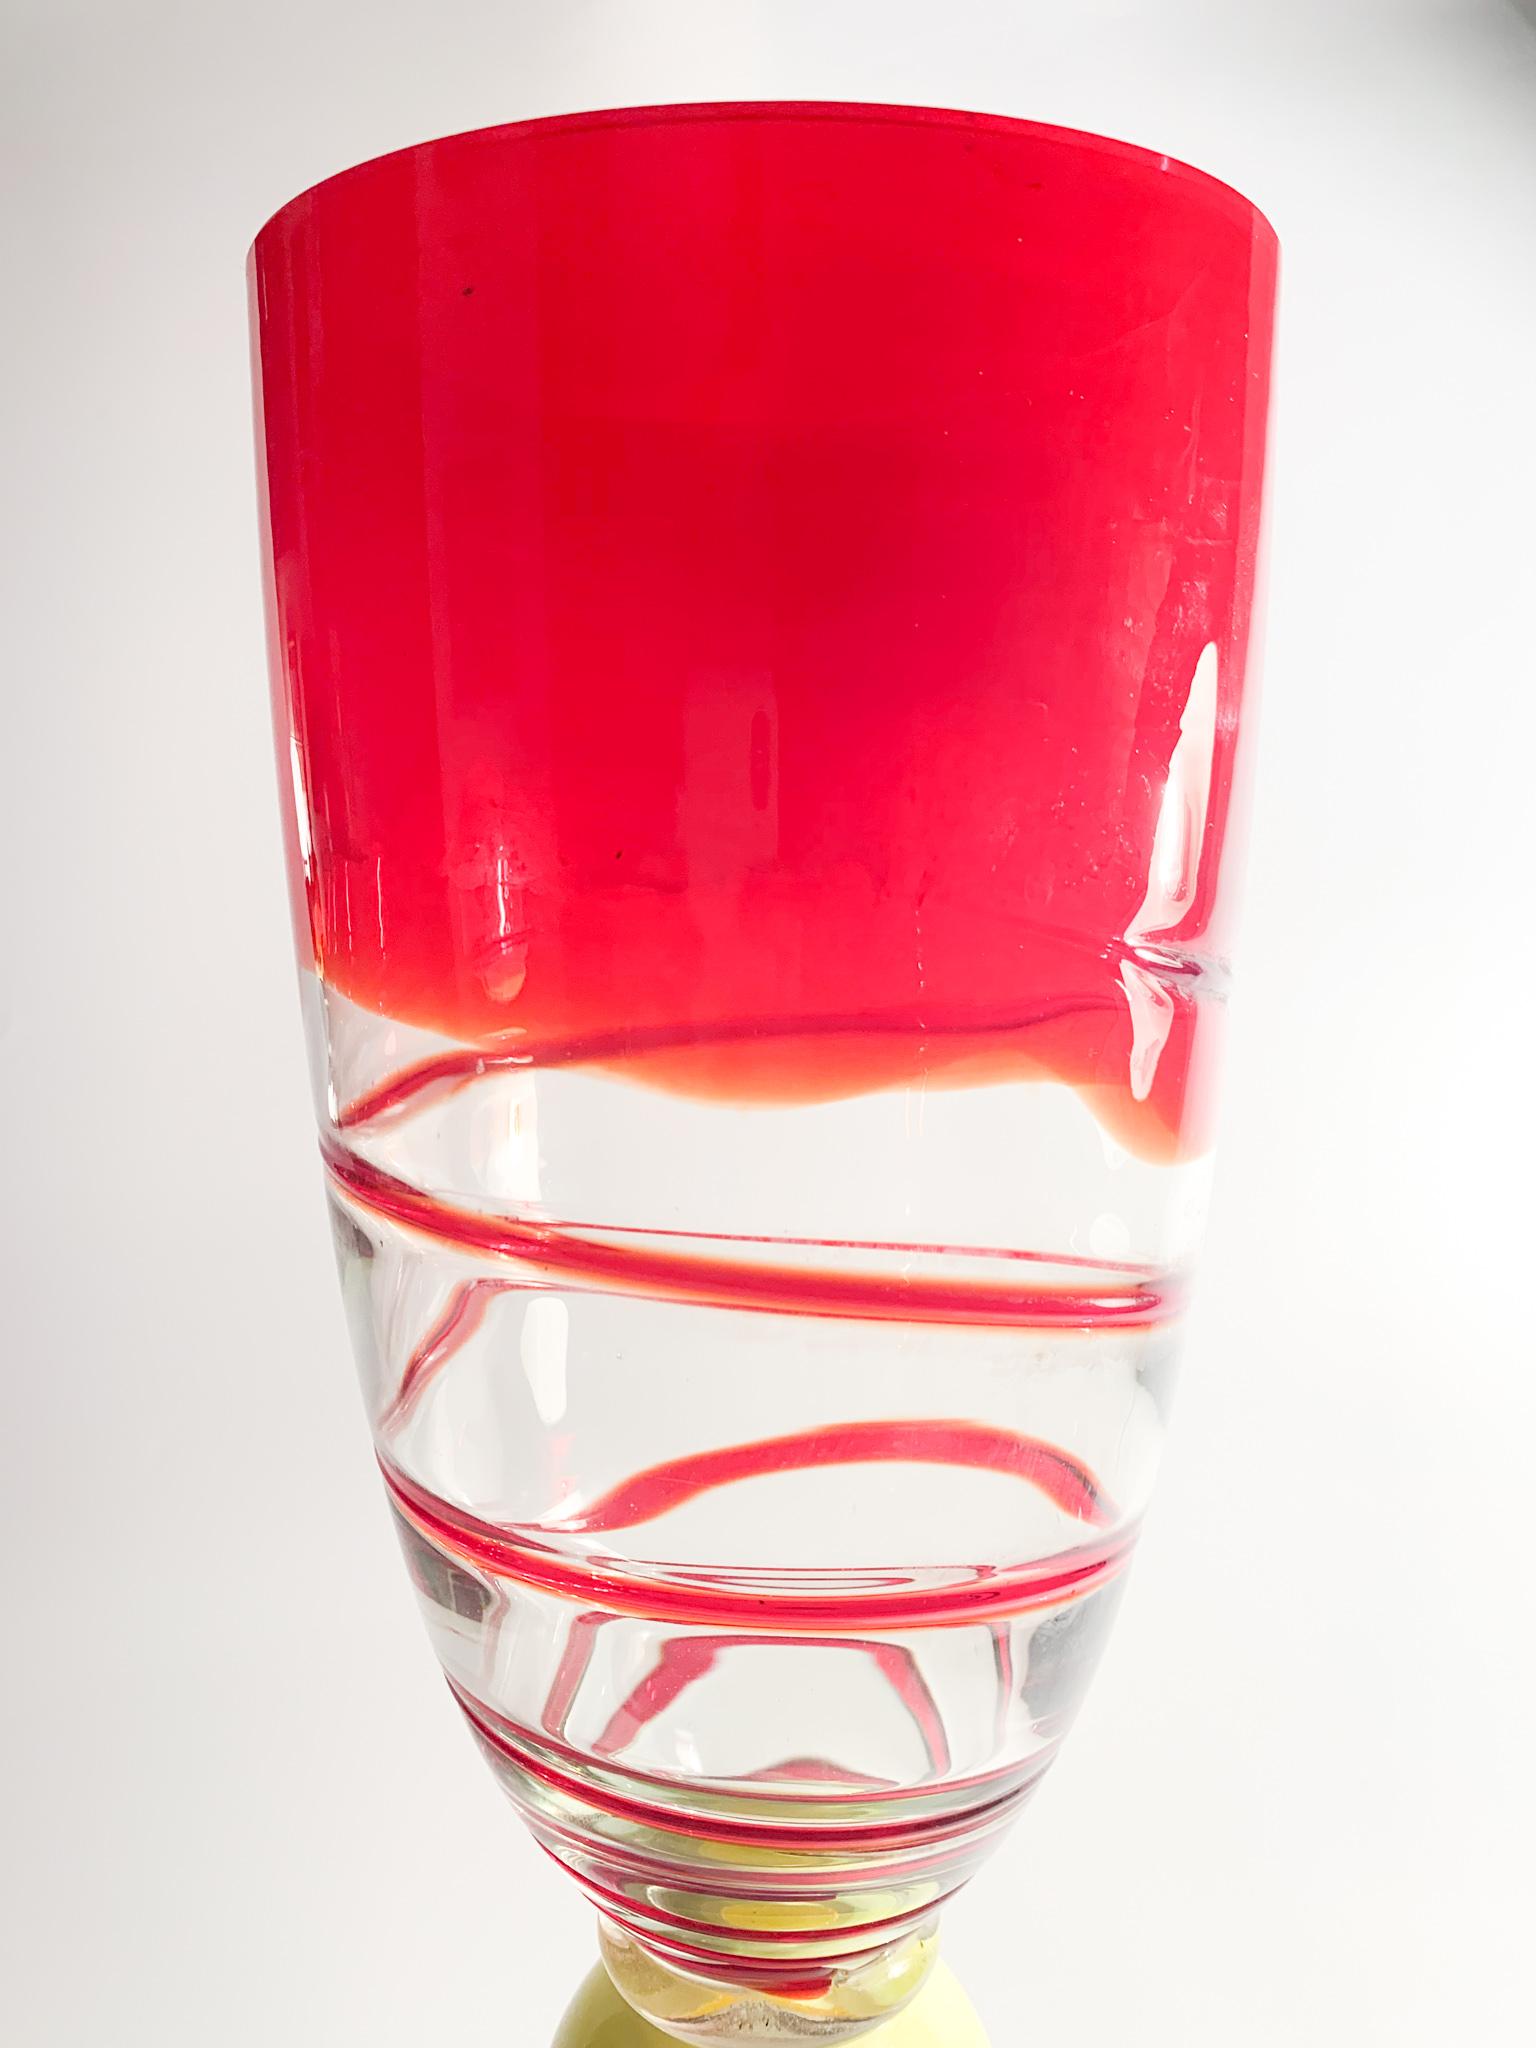 Vase in red, yellow and blue Murano glass, whose creation is attributable to Carlo Moretti in the 1960s

Measures: Ø cm 14 H cm 41

The vase is not signed, however the shape and the use of colours are attributable to Carlo Moretti